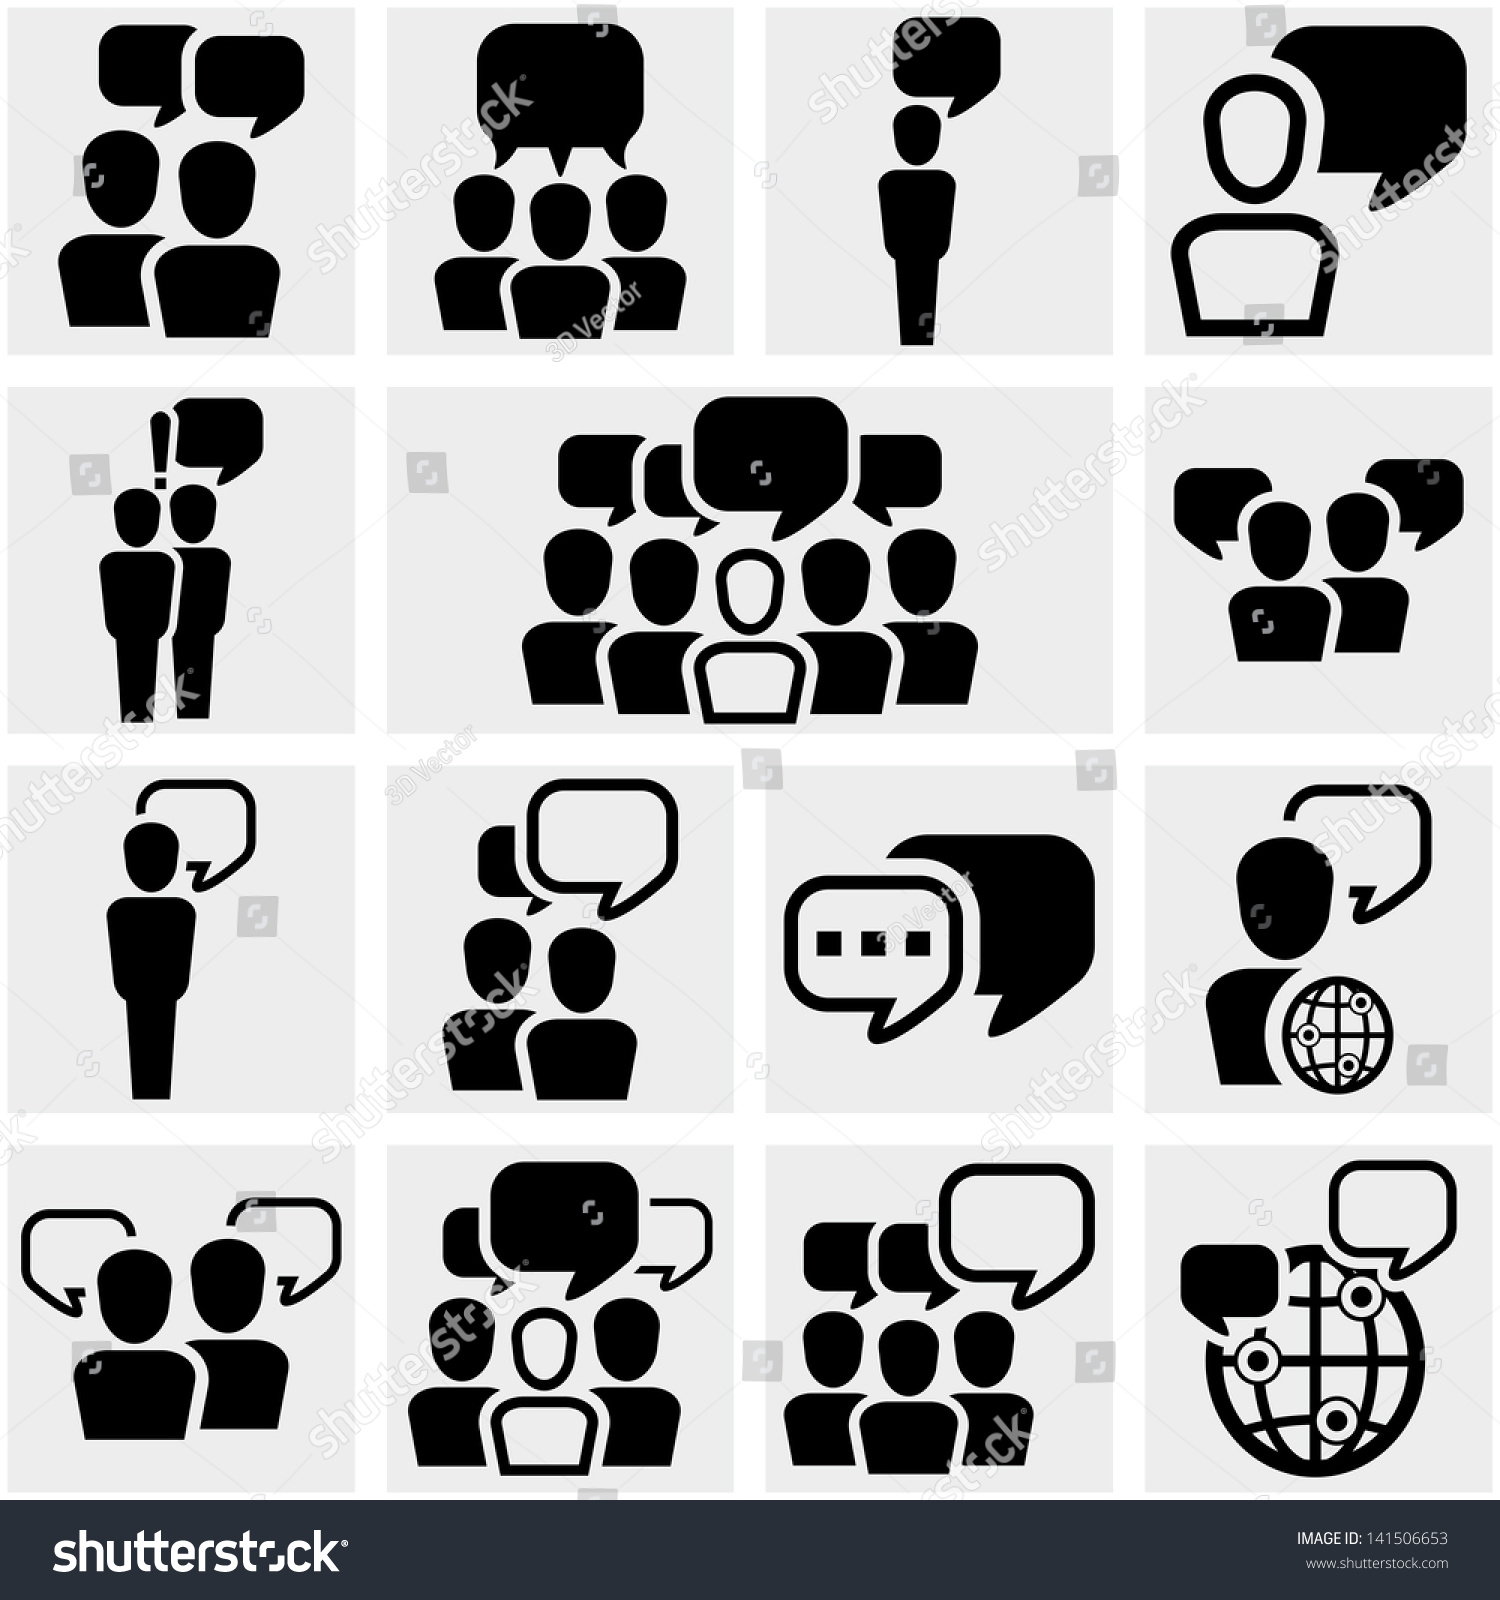 SVG of Human resources, business, social vector icon set on gray. svg